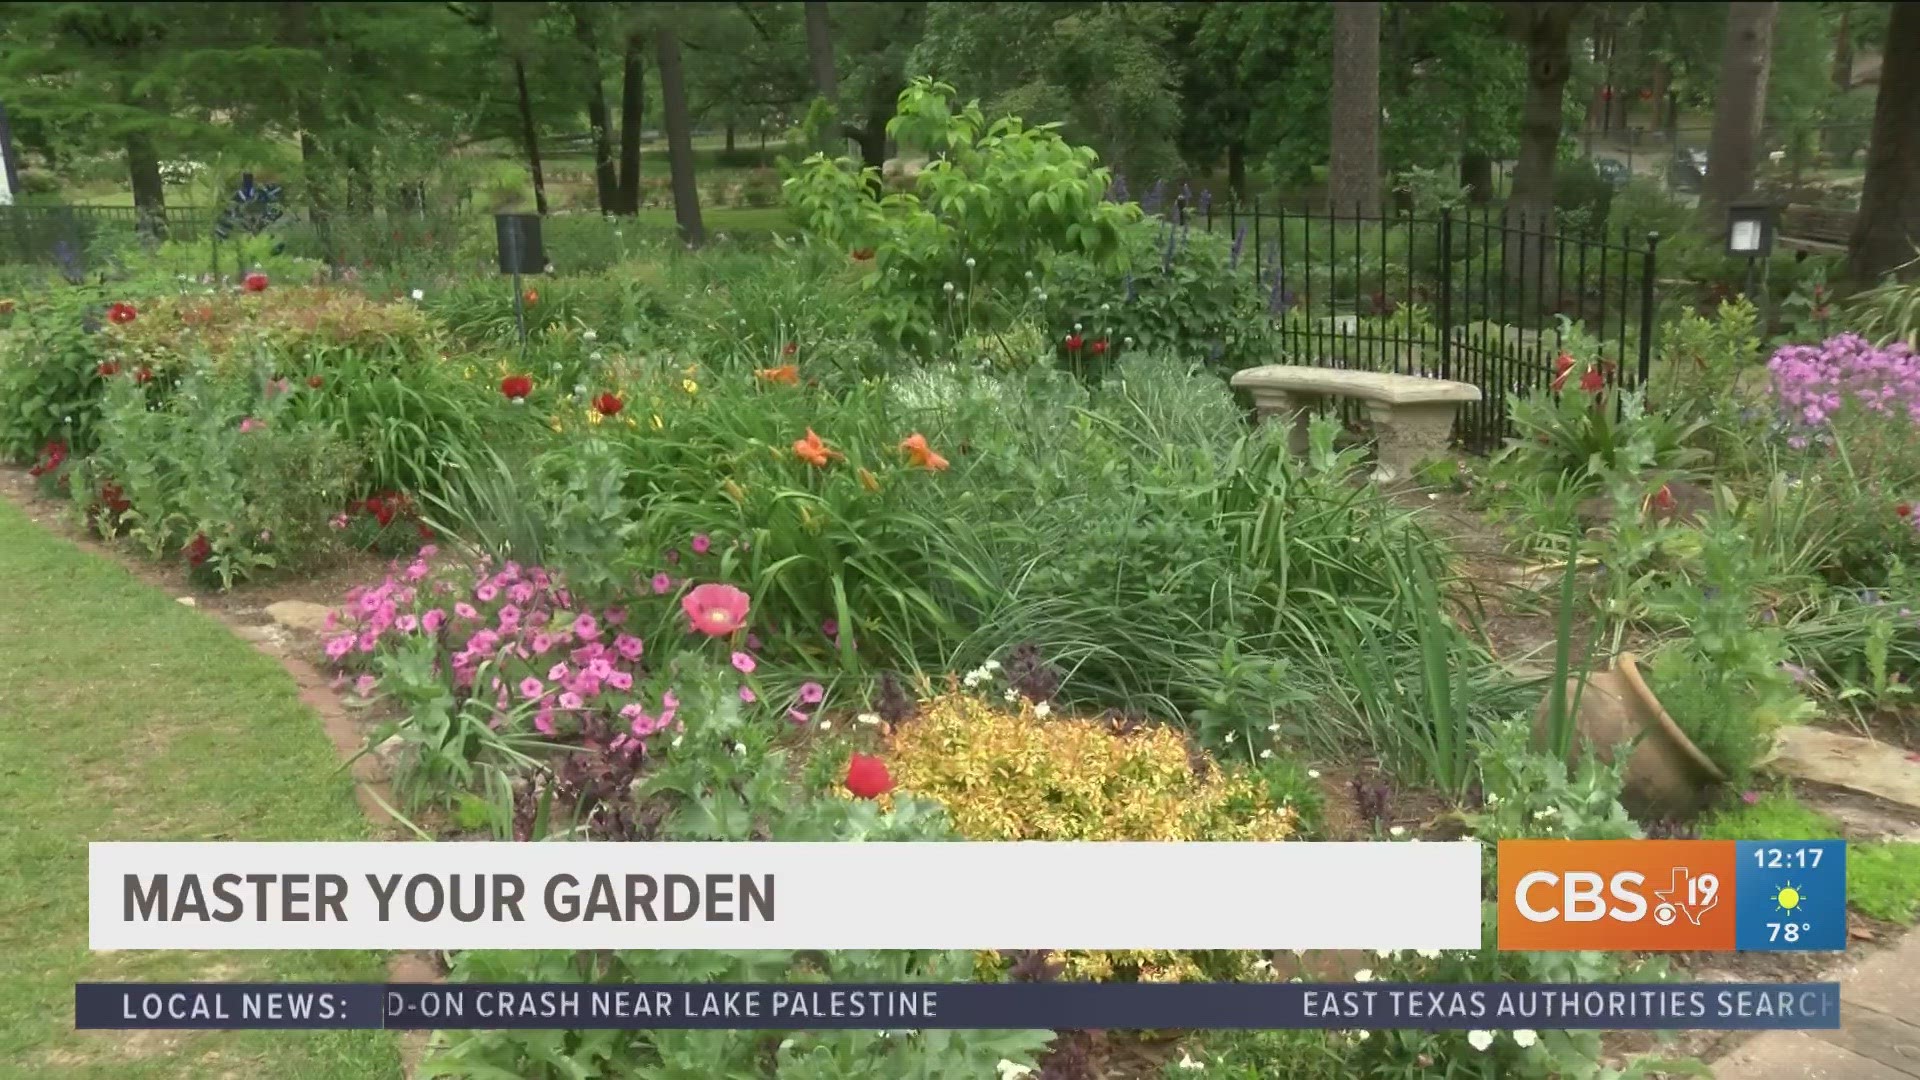 The Smith County Master Gardeners joins CBS19 and gives us all the tips for successful spring gardening.